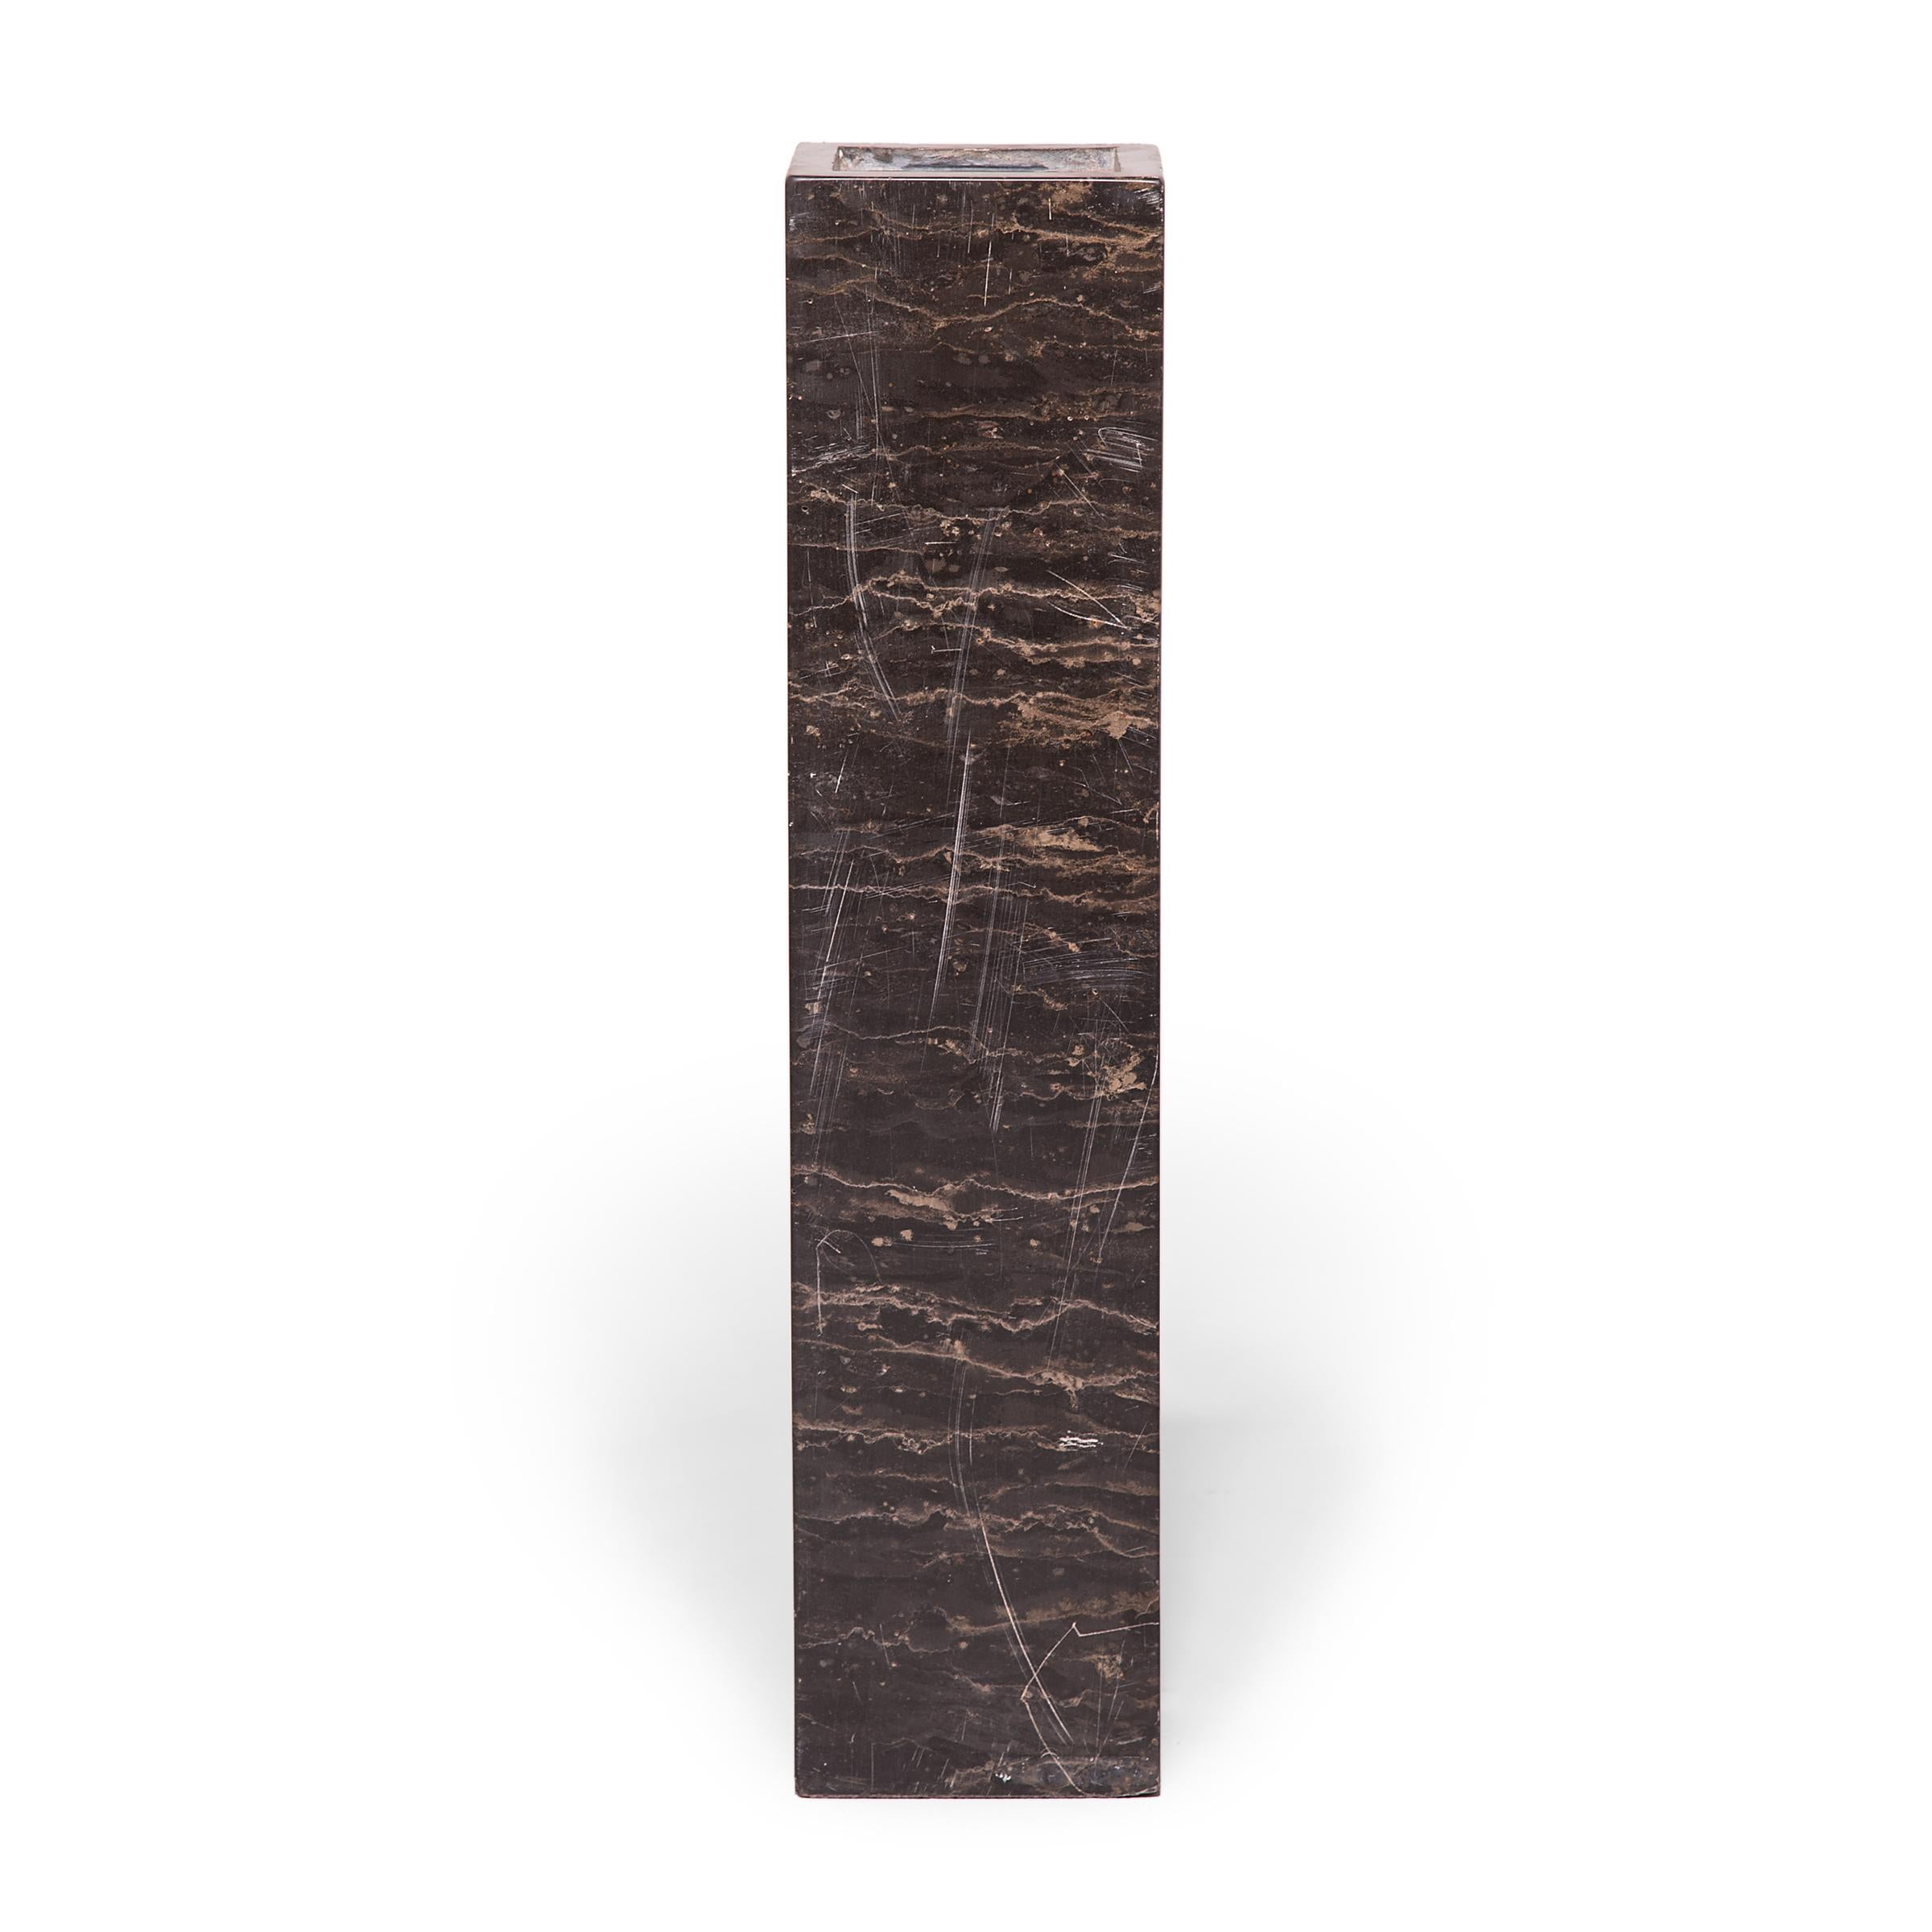 Displaying the restraint and simplicity that defined Ming dynasty design, this hand-carved marble column can find a home in any room. Natural striations in the marble are accentuated by the column's clean lines, allowing the beauty of the stone to